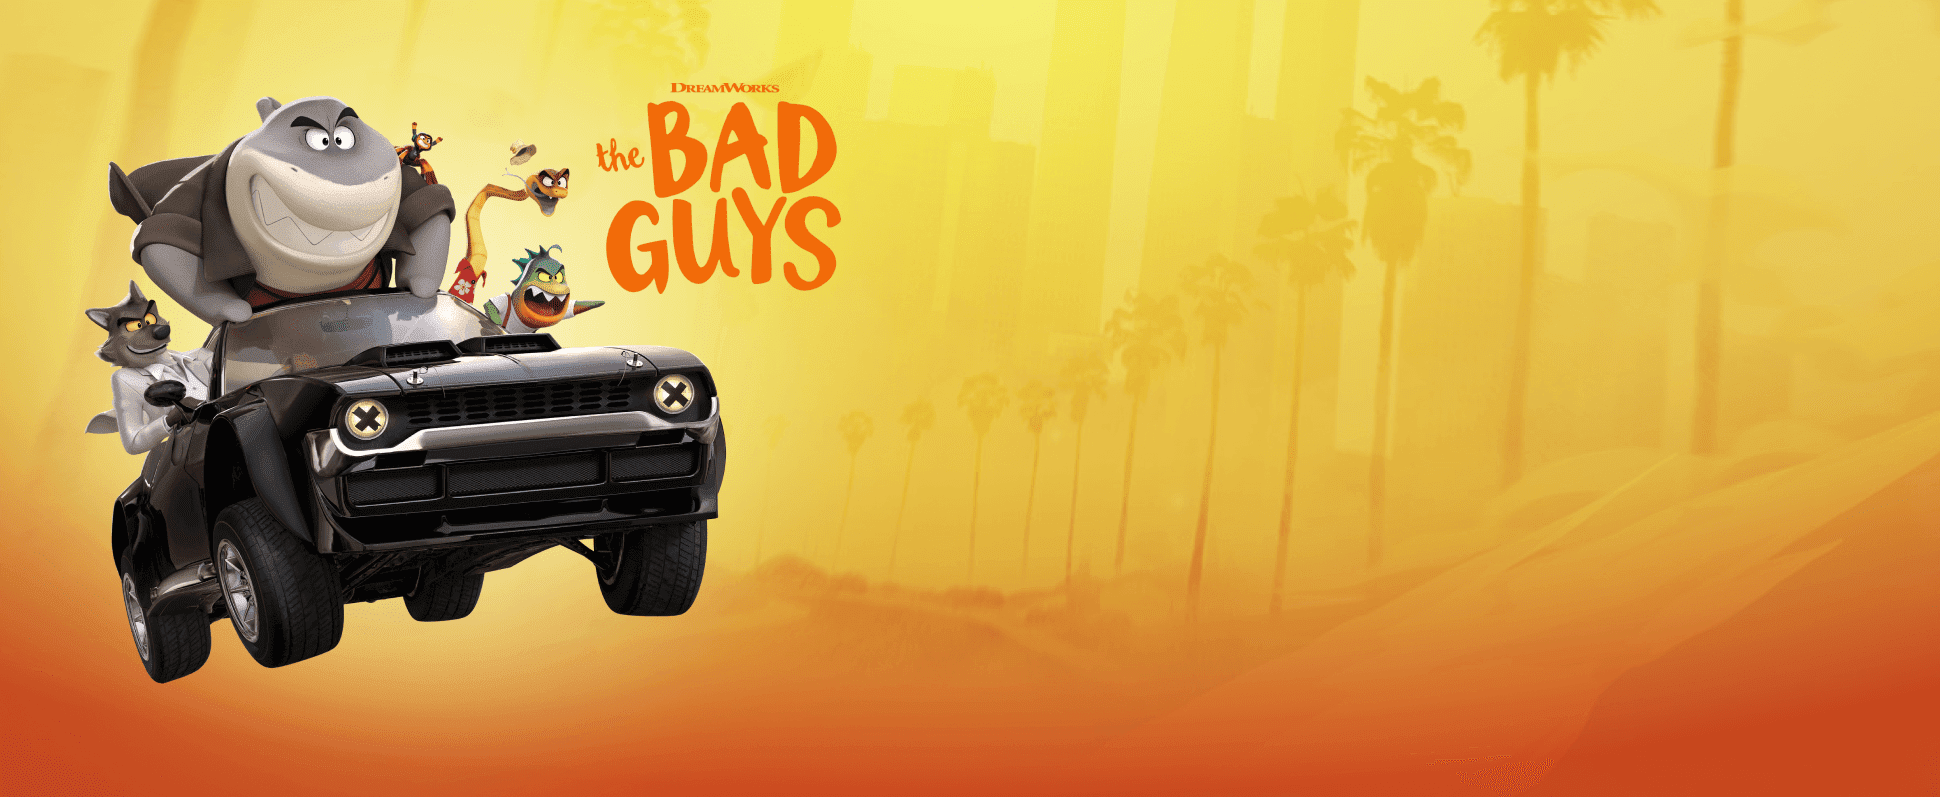 Background image featuring a car driven by animated characters from the film The Bad Guys